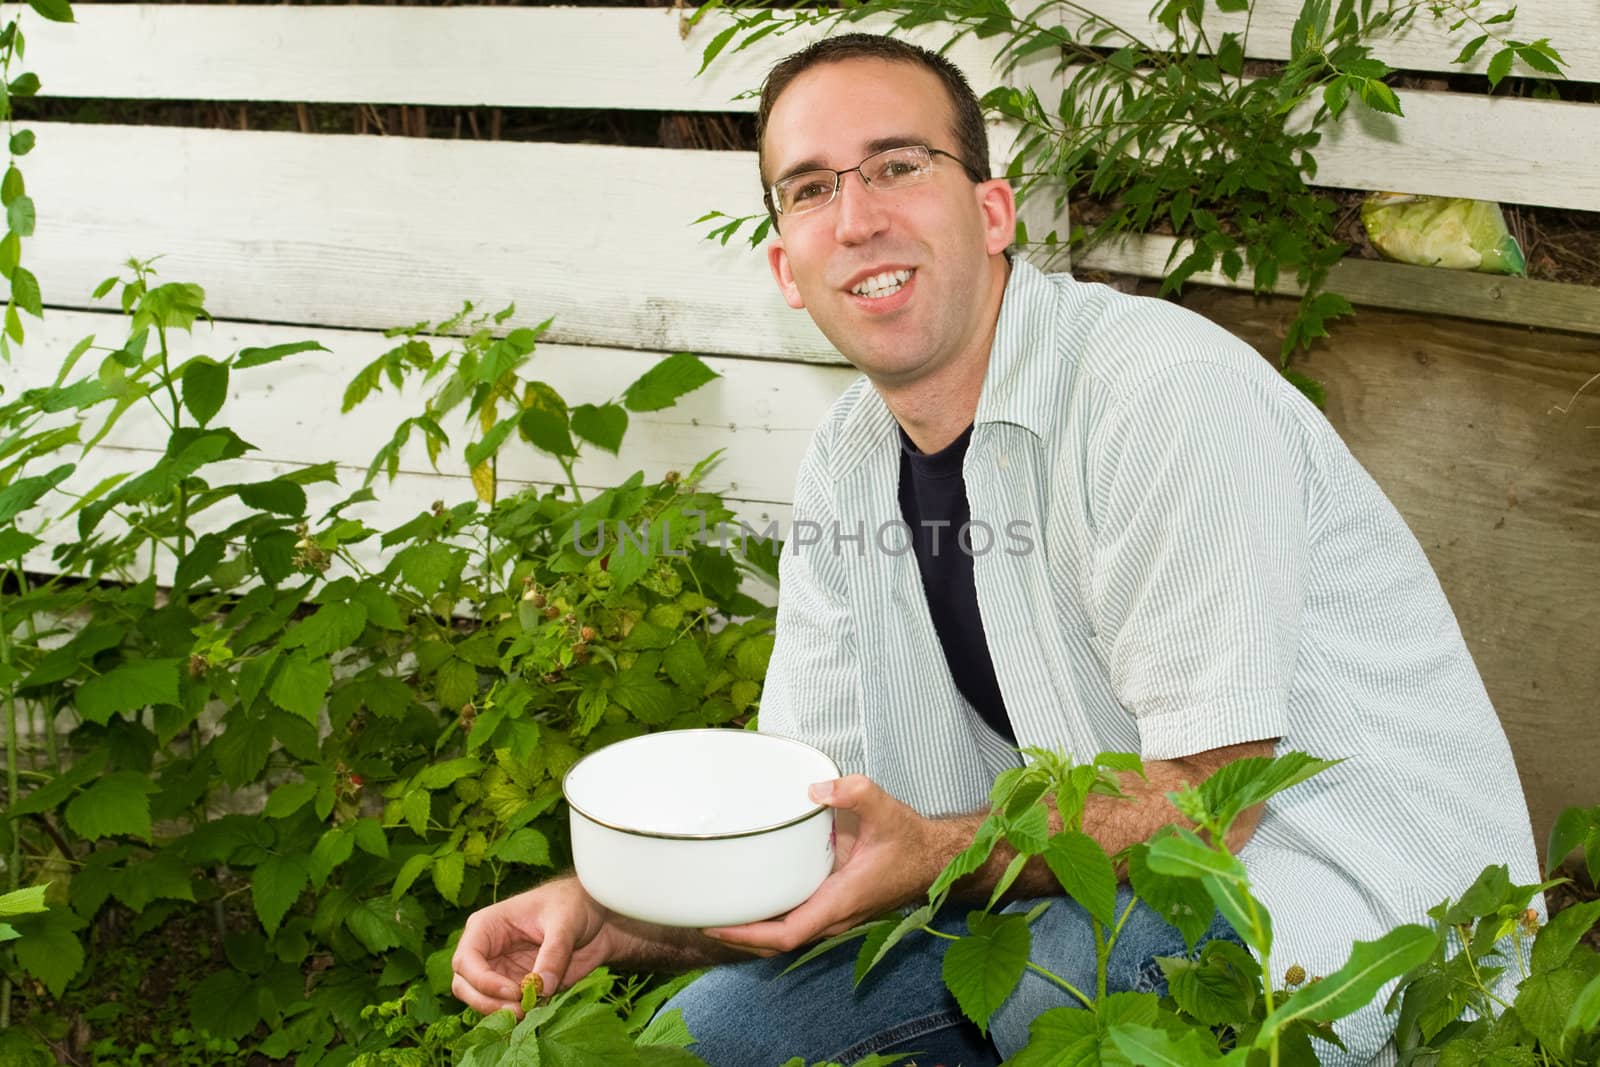 A young man wearing glasses is collecting raspberries of his garden outside